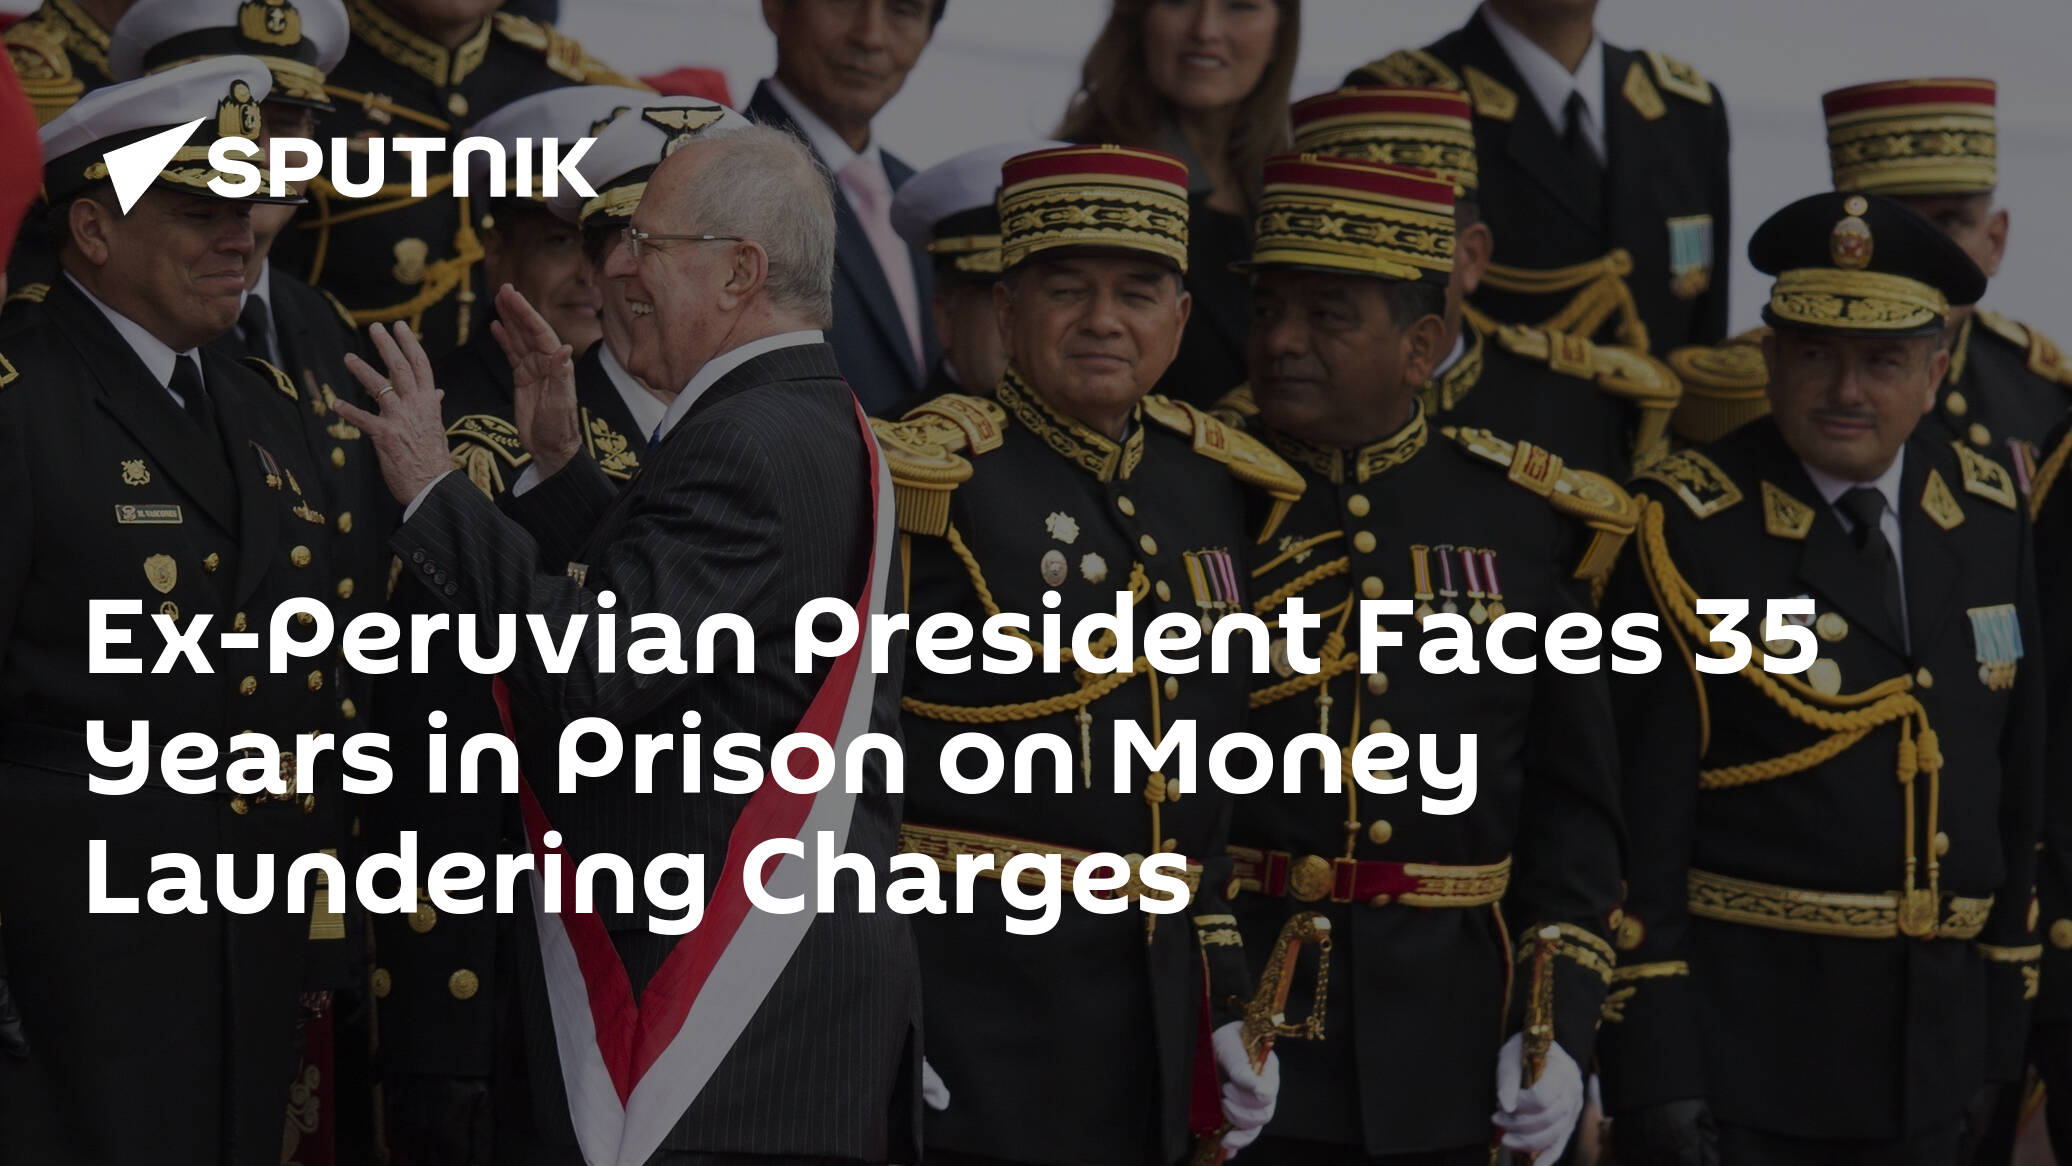 Ex-Peruvian President Faces 35 Years in Prison on Money Laundering Charges